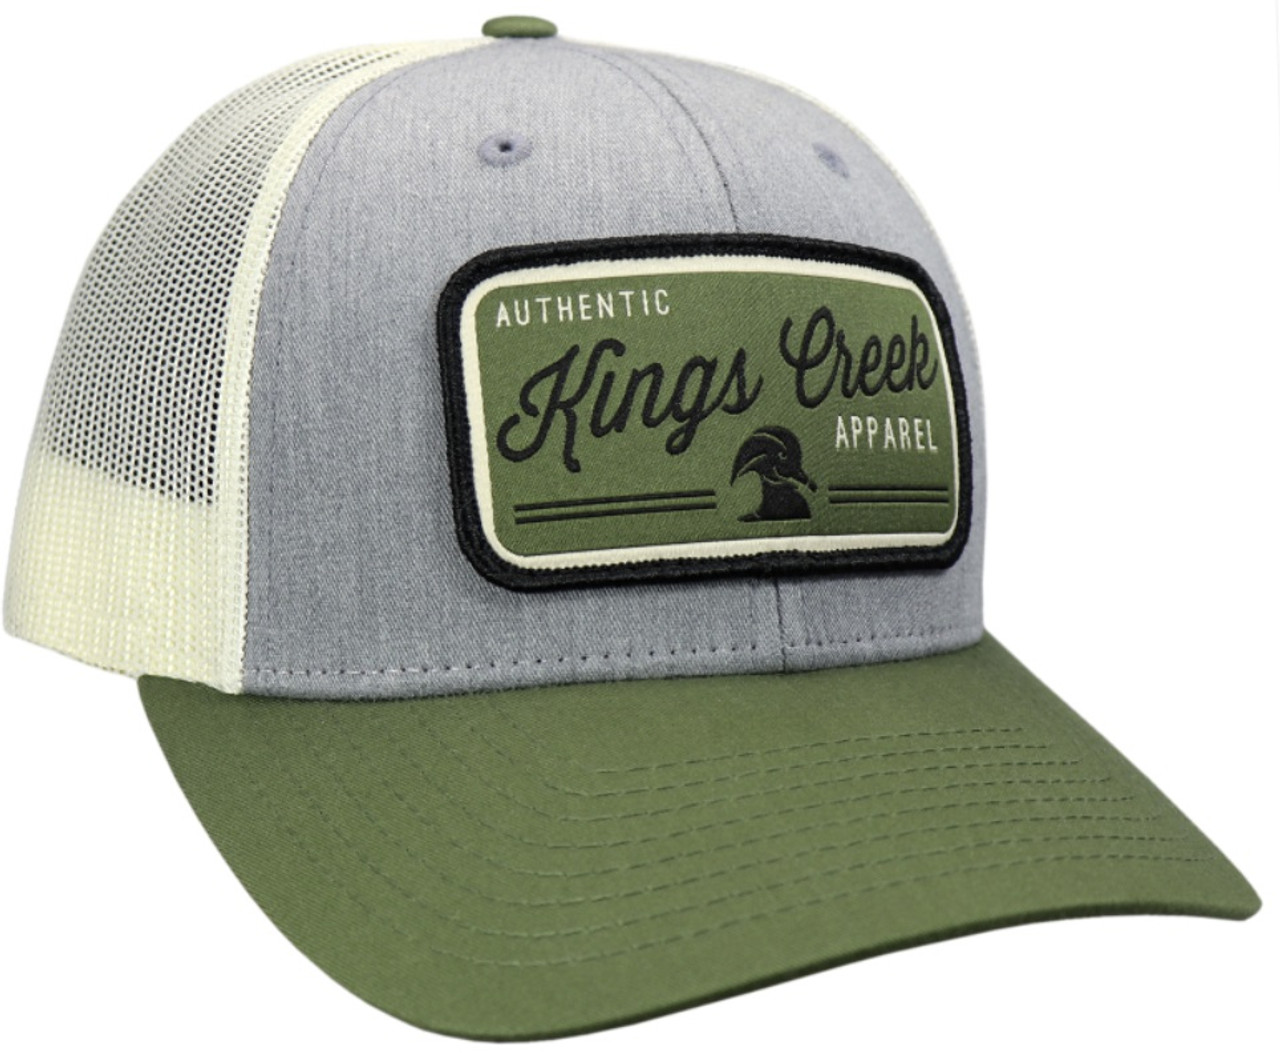 KINGS CREEK APPAREL GREEN AUTHENTIC PATCH HAT GREEN/WHITE - Pee Dee ...